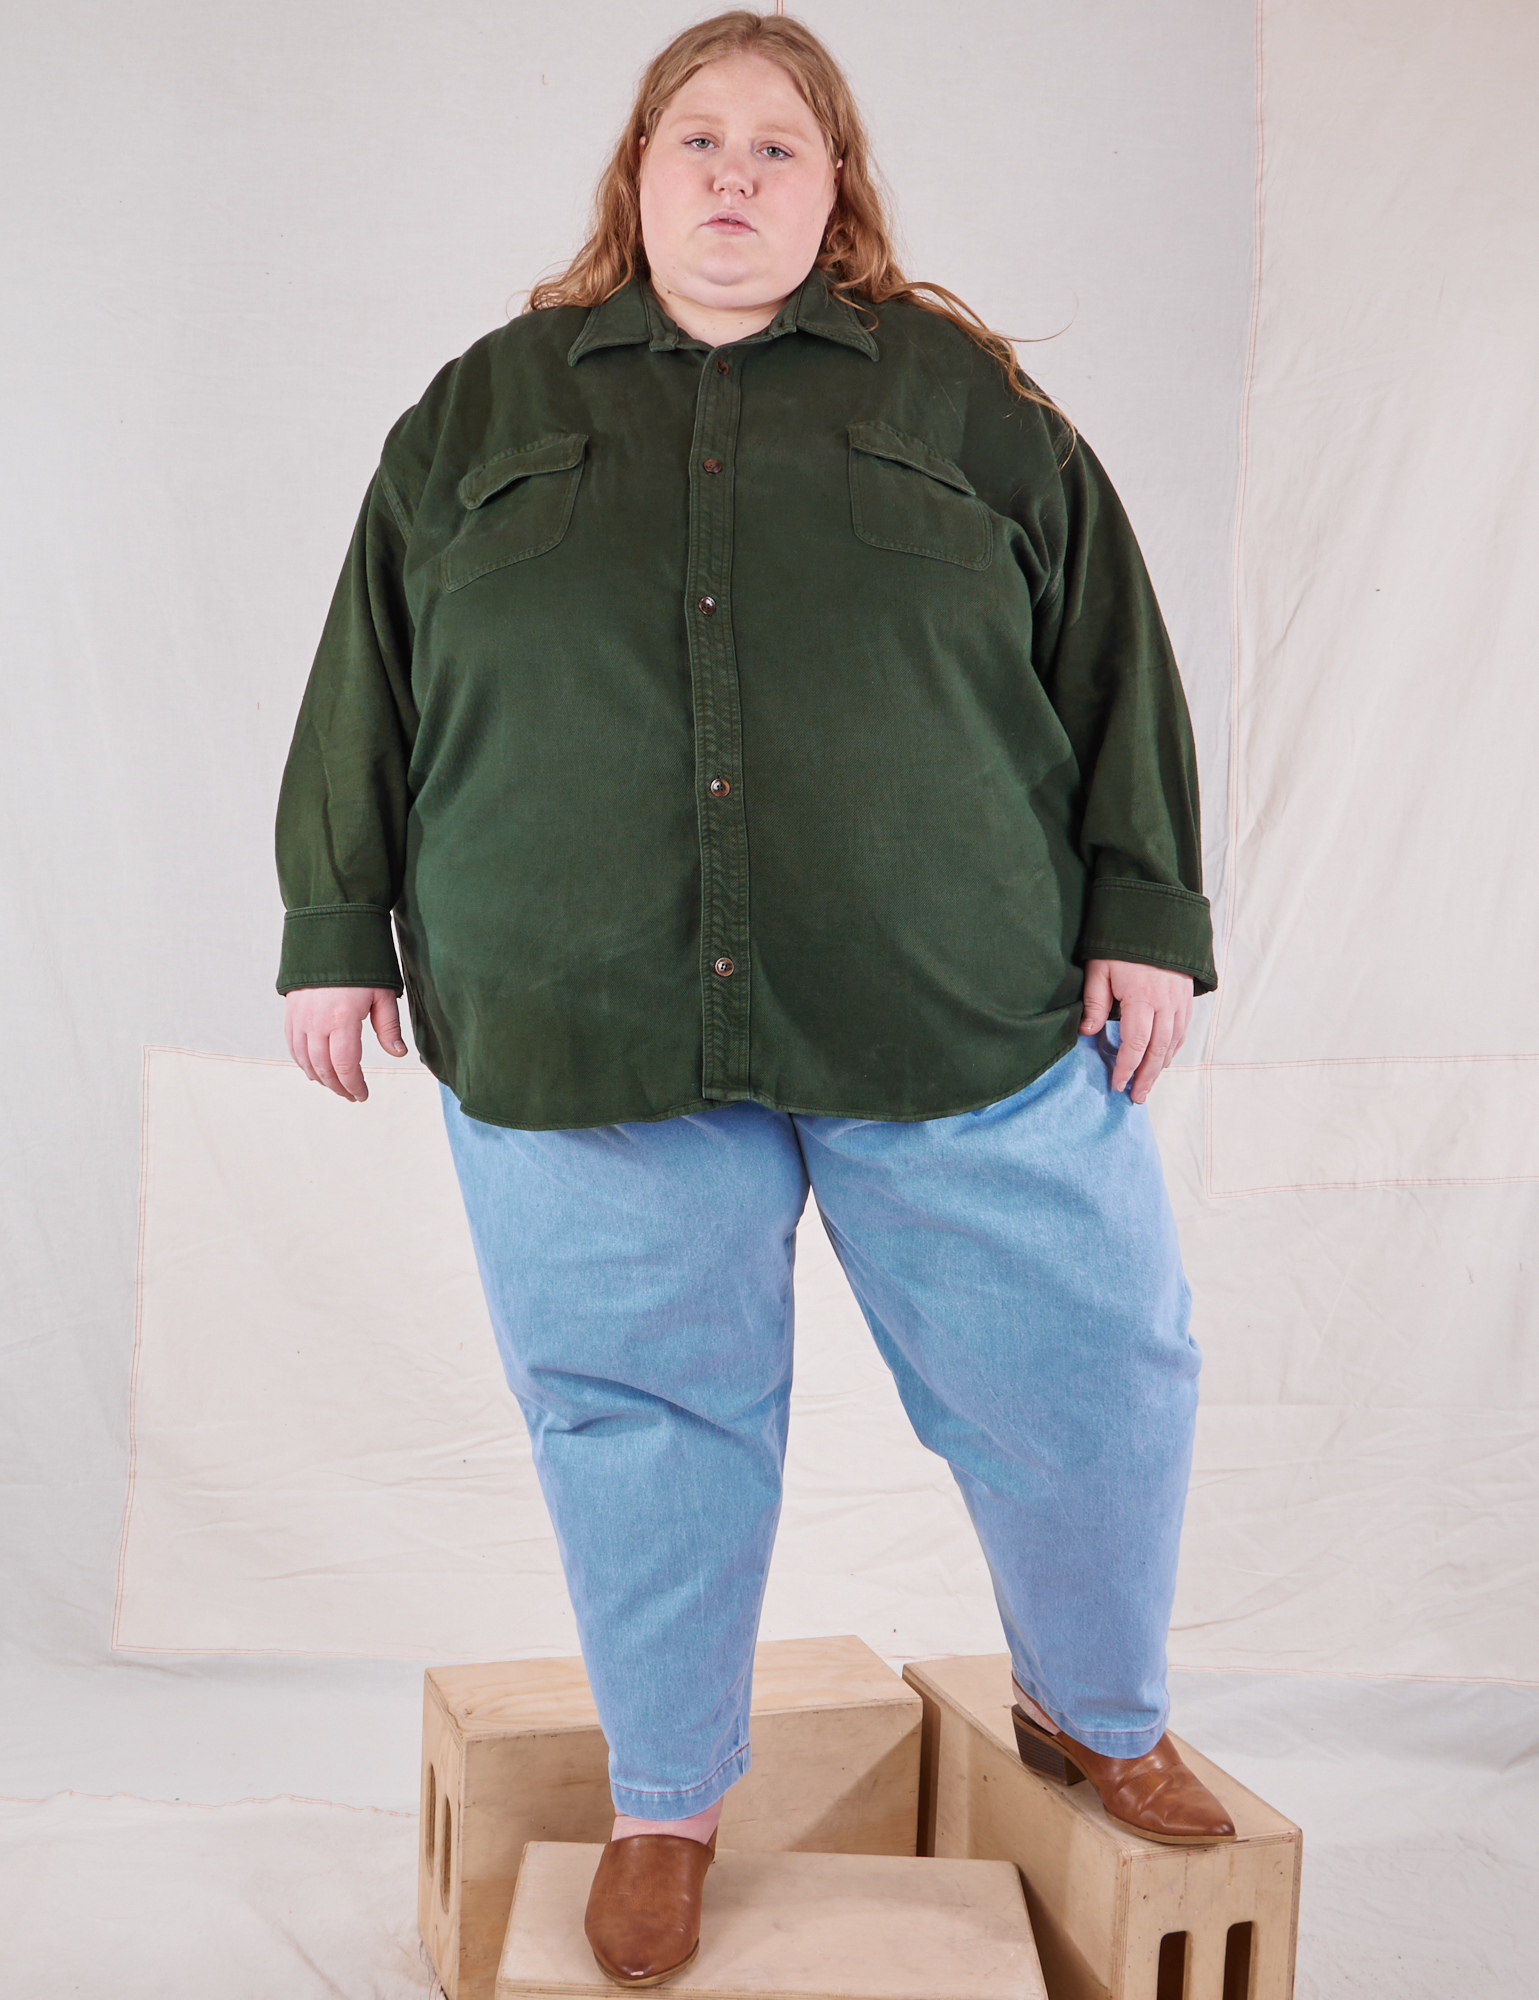 Catie is 5&#39;11&quot; and wearing 5XL Flannel Overshirt in Swamp Green paired with light wash Trouser Jeans